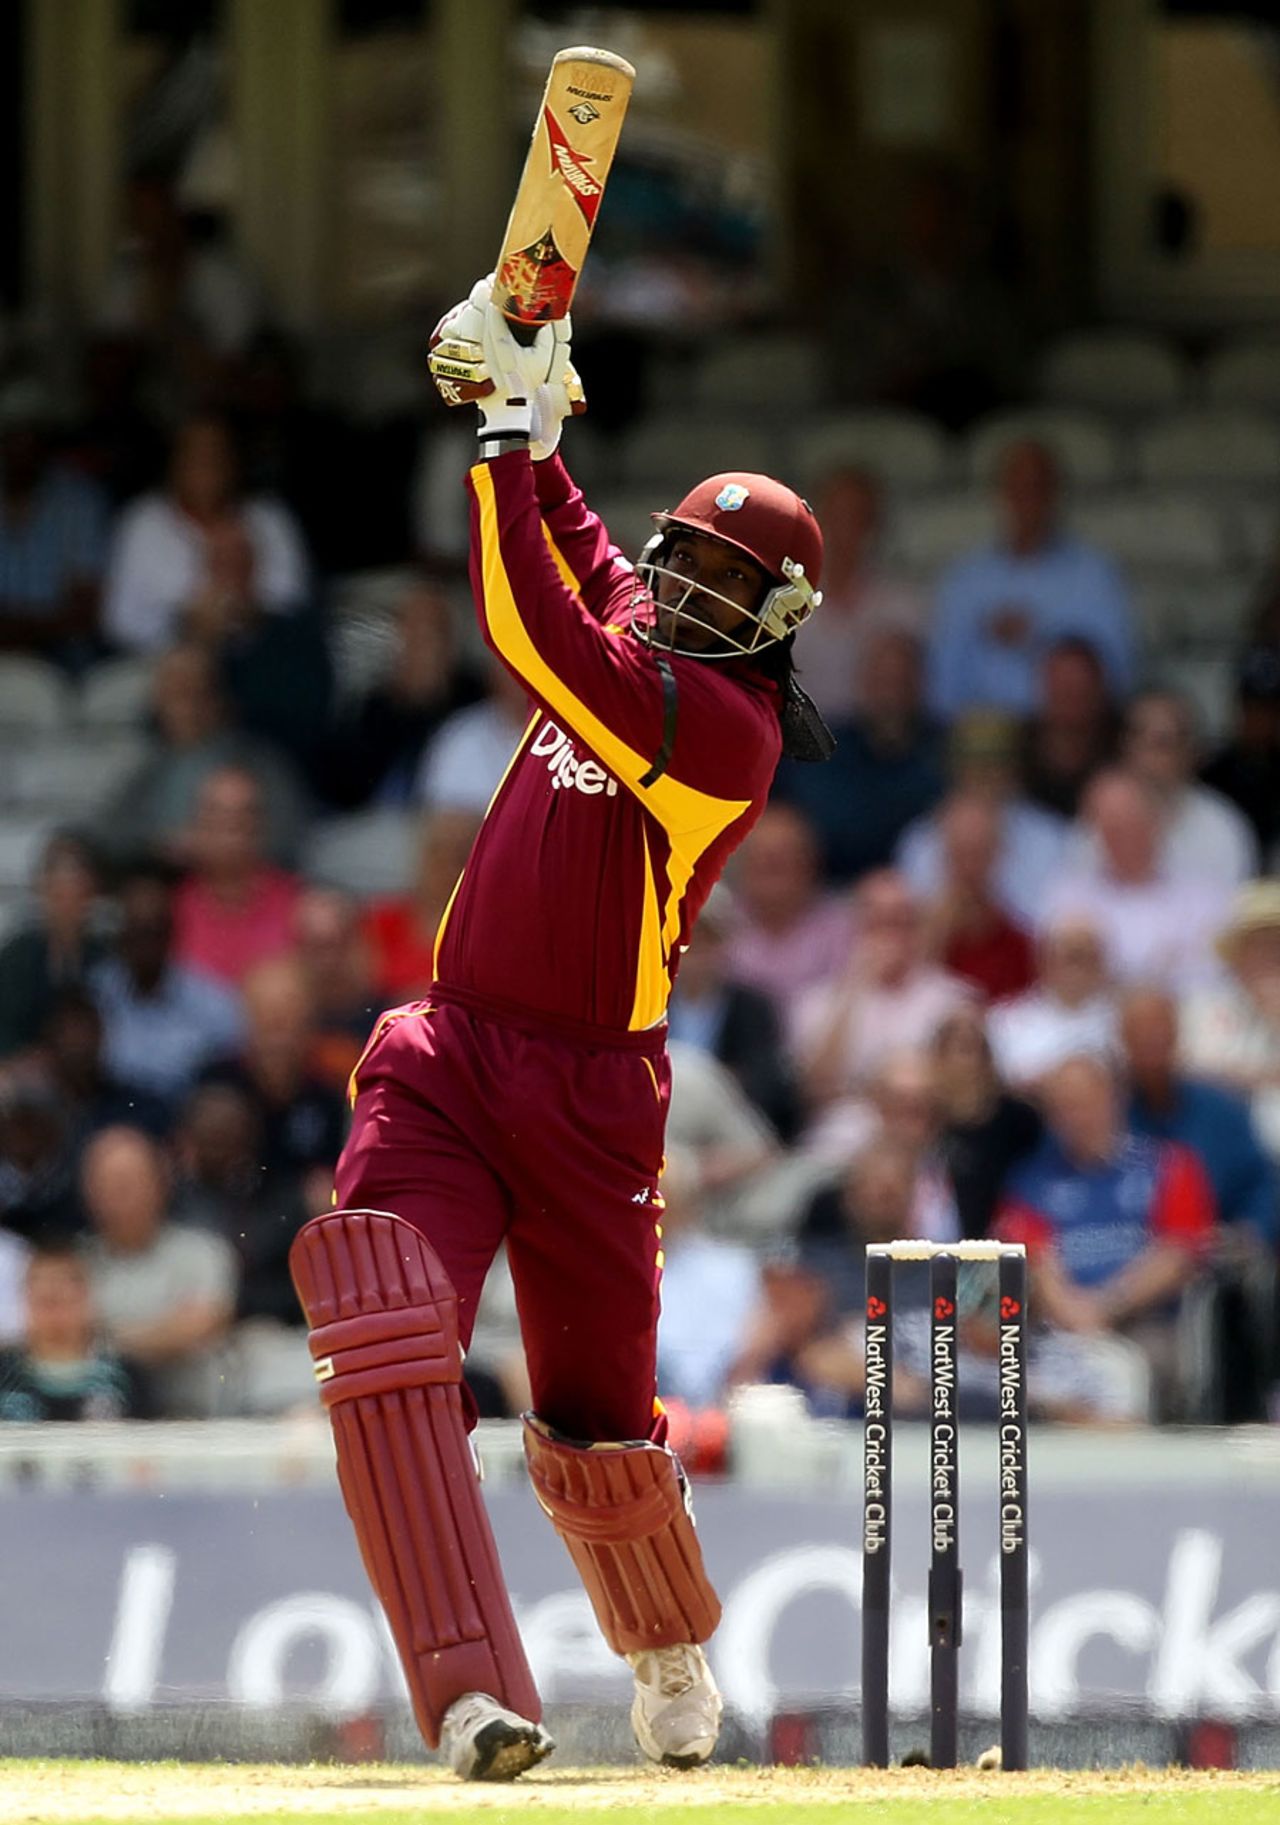 Chris Gayle cut loose against Tim Bresnan with some huge sixes, England v West Indies, 2nd ODI, The Oval, June 19, 2012